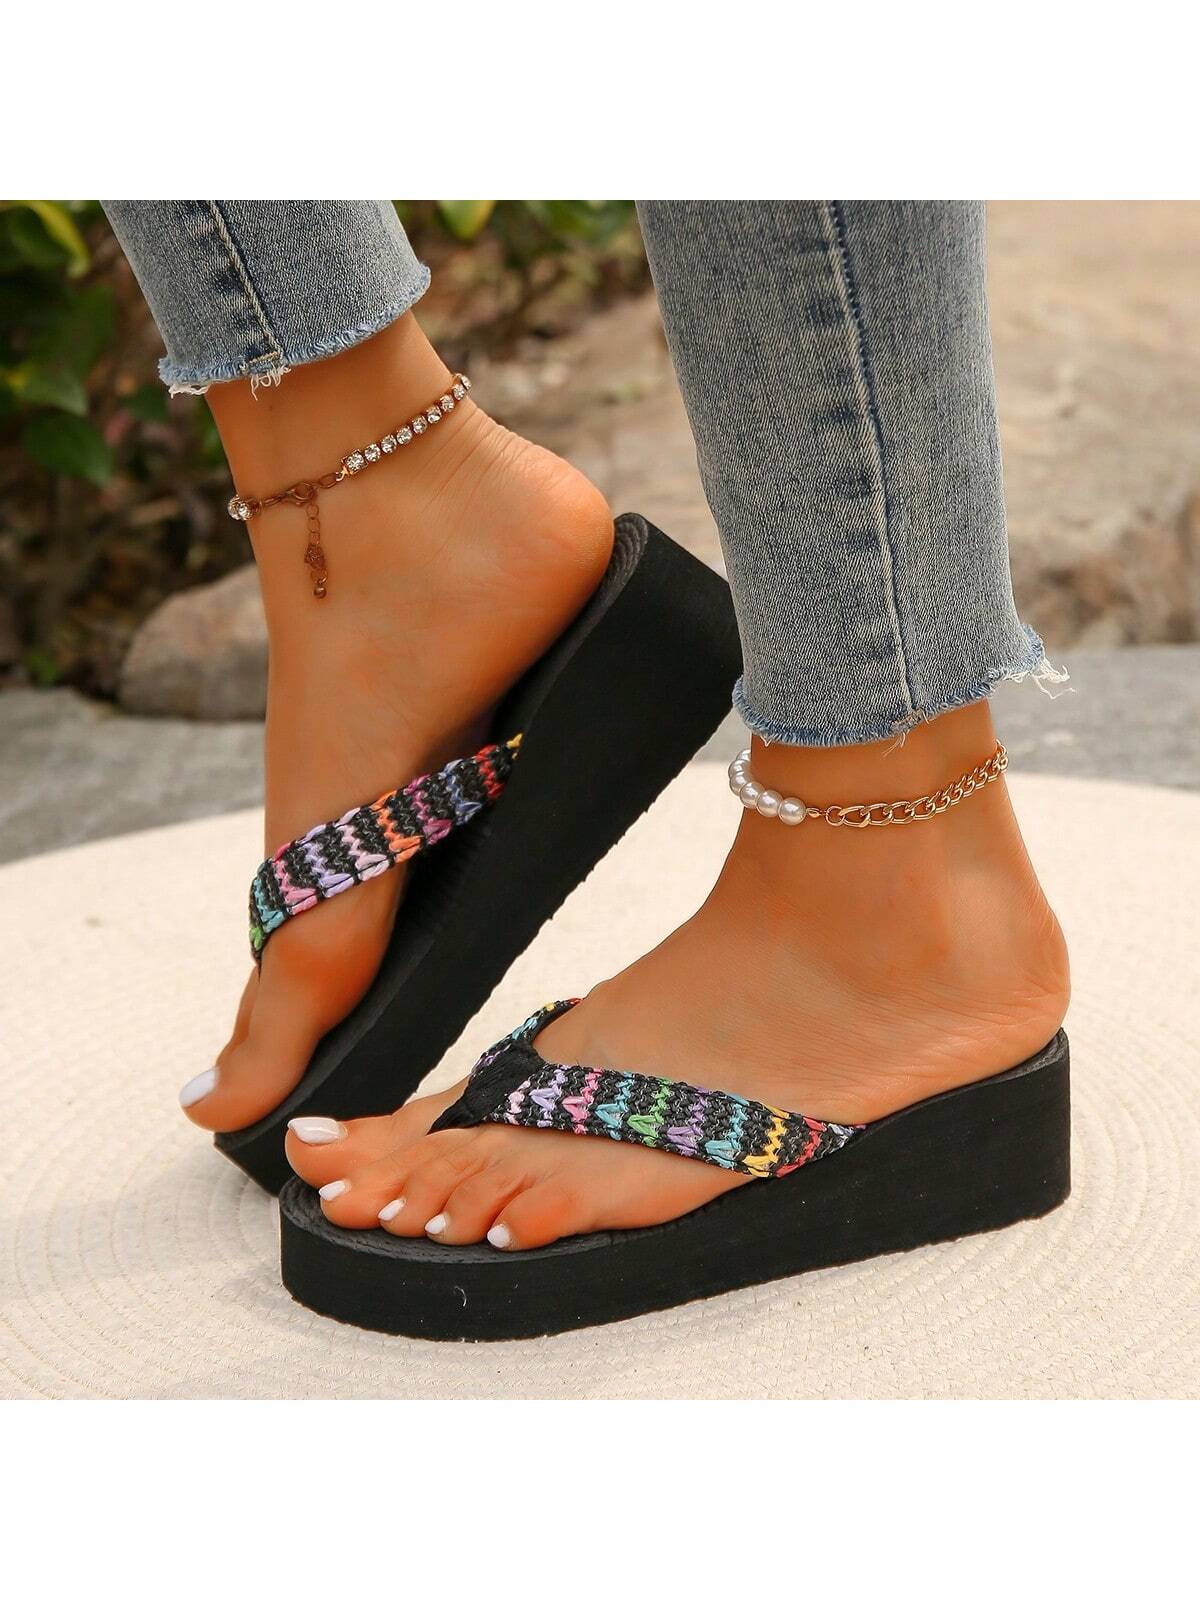 Women Thick-Soled 5cm Wedge Heel  Rope Flip-Flops Shoes, Anti-Slip And Wear-Resistant, Suitable For Casual Beach Holiday, Summer Wind Slope Heeled Slippers-Black-5